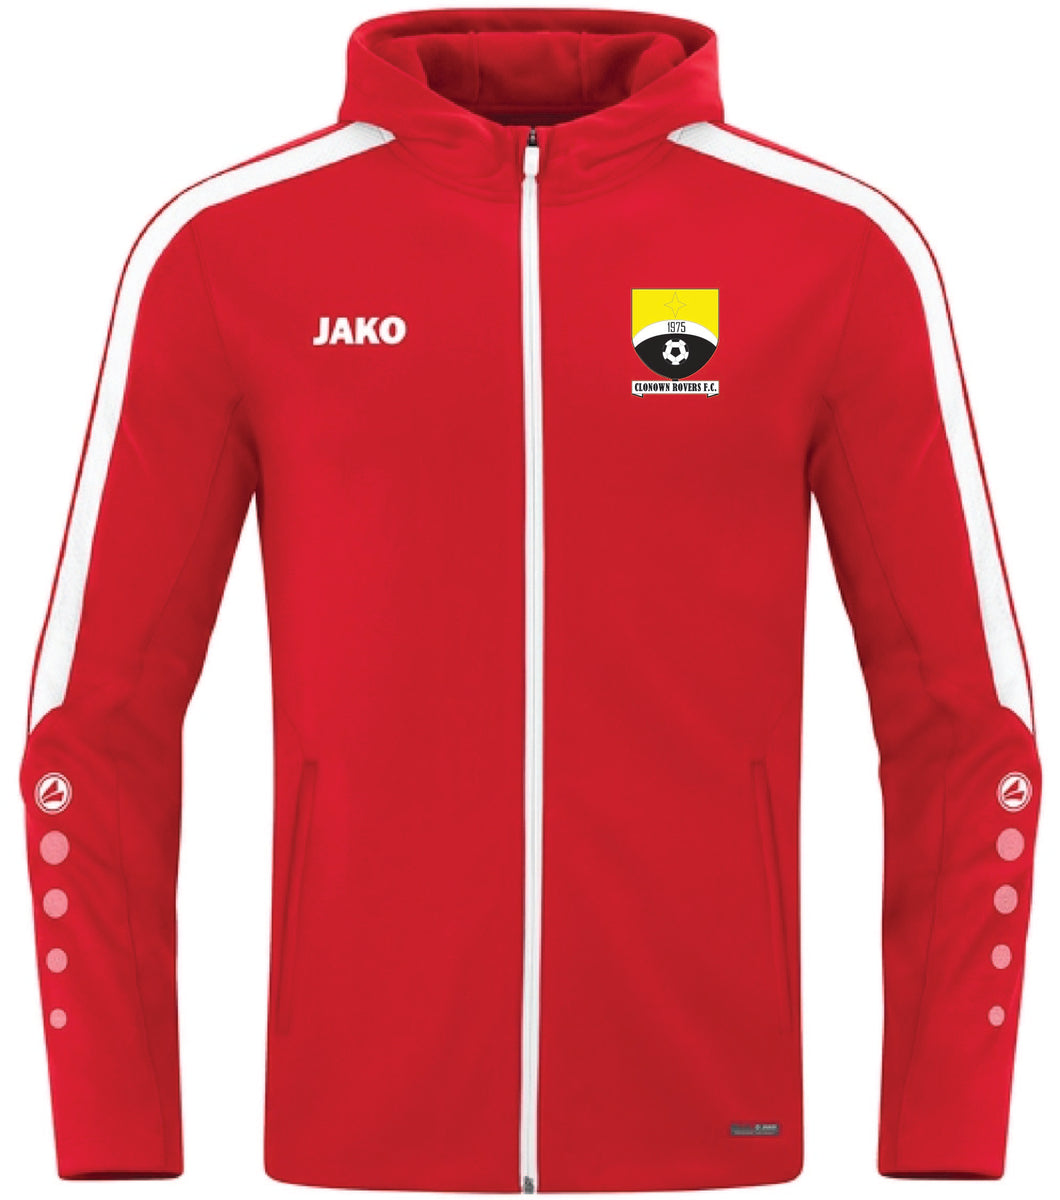 Adult JAKO Clonown Rovers FC Hooded Jacket CR6823